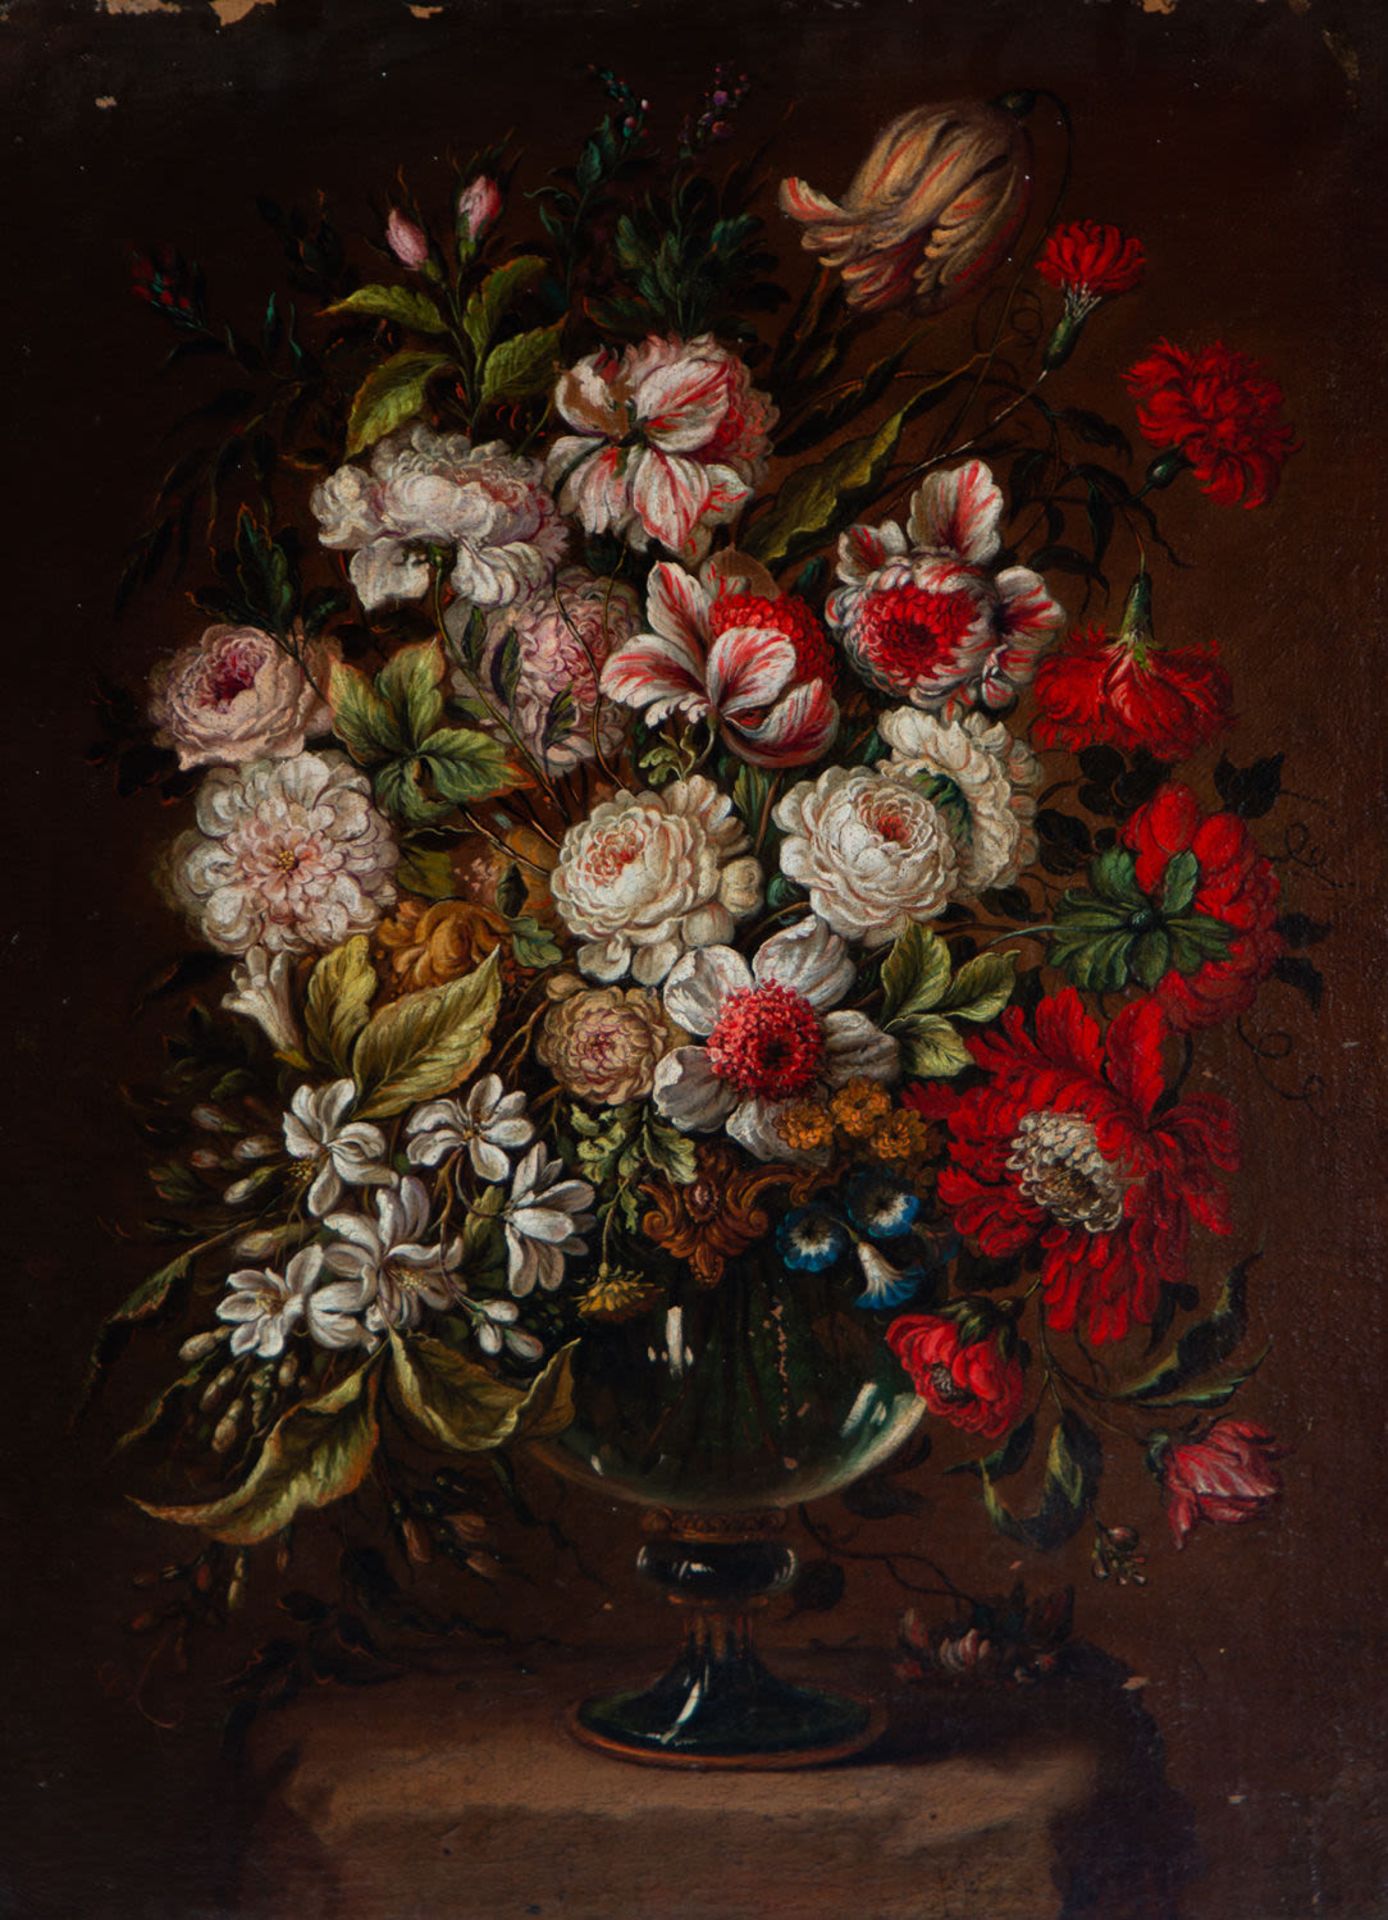 Pair of large still lifes of Flowers, Dutch school of the 17th - 18th century - Image 3 of 20